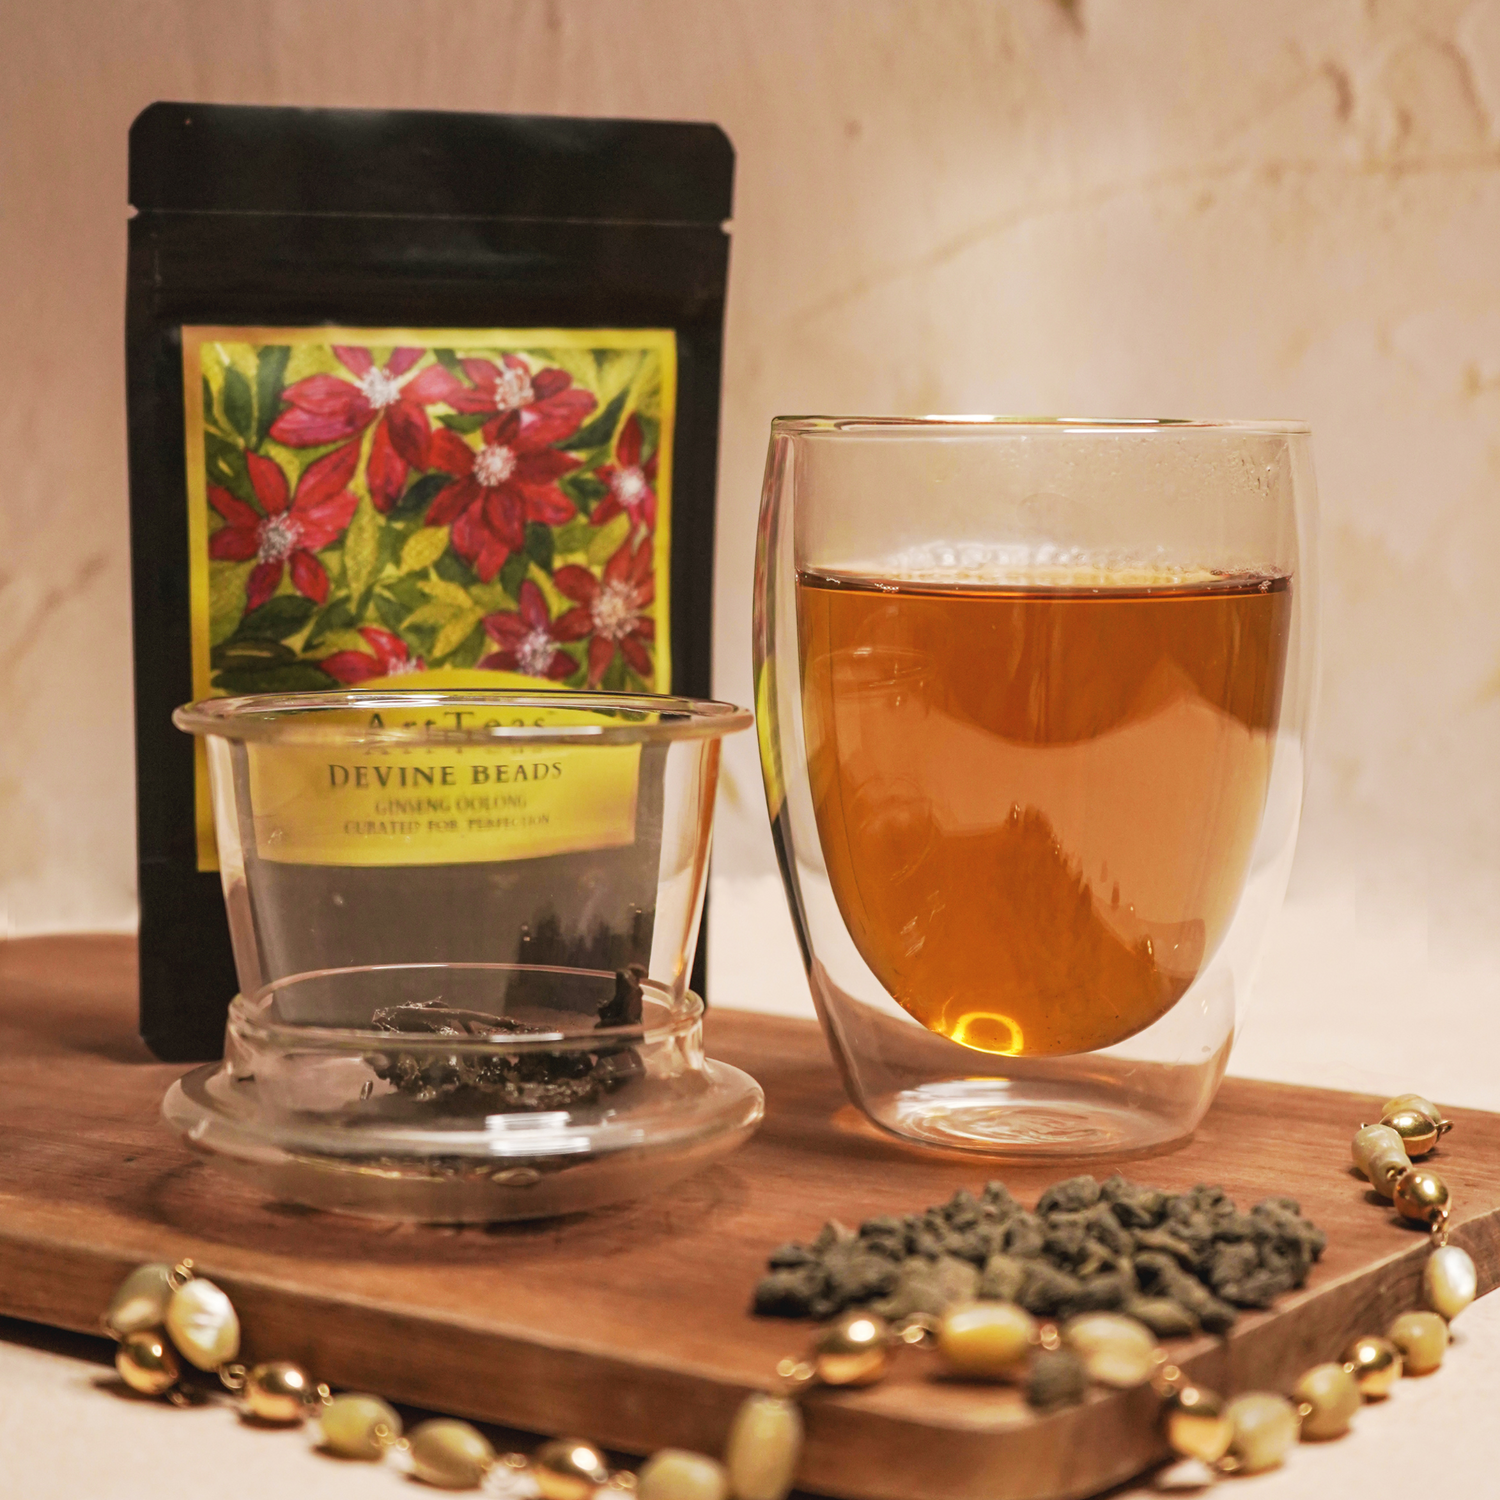 Buy Oolong Ginseng Tea: Online Chai Experience